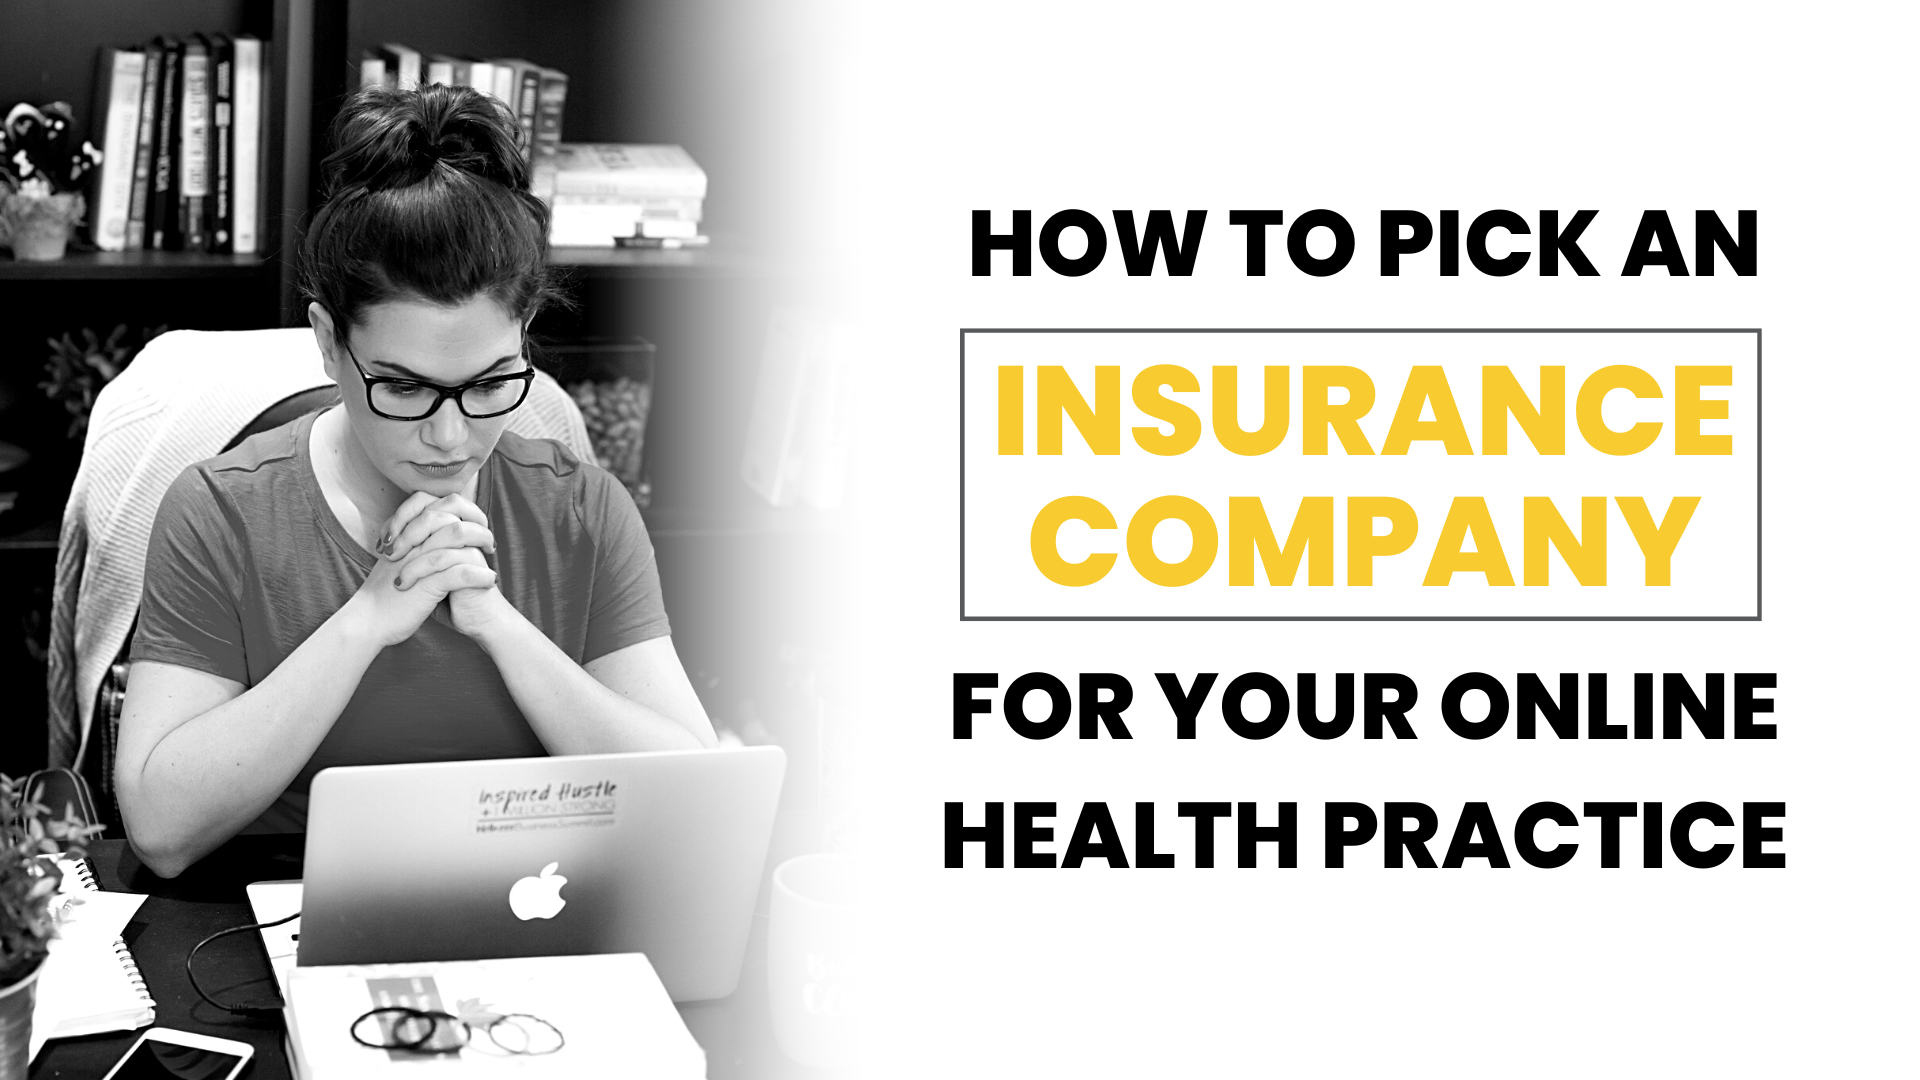 How to pick an insurance company for your online health practice